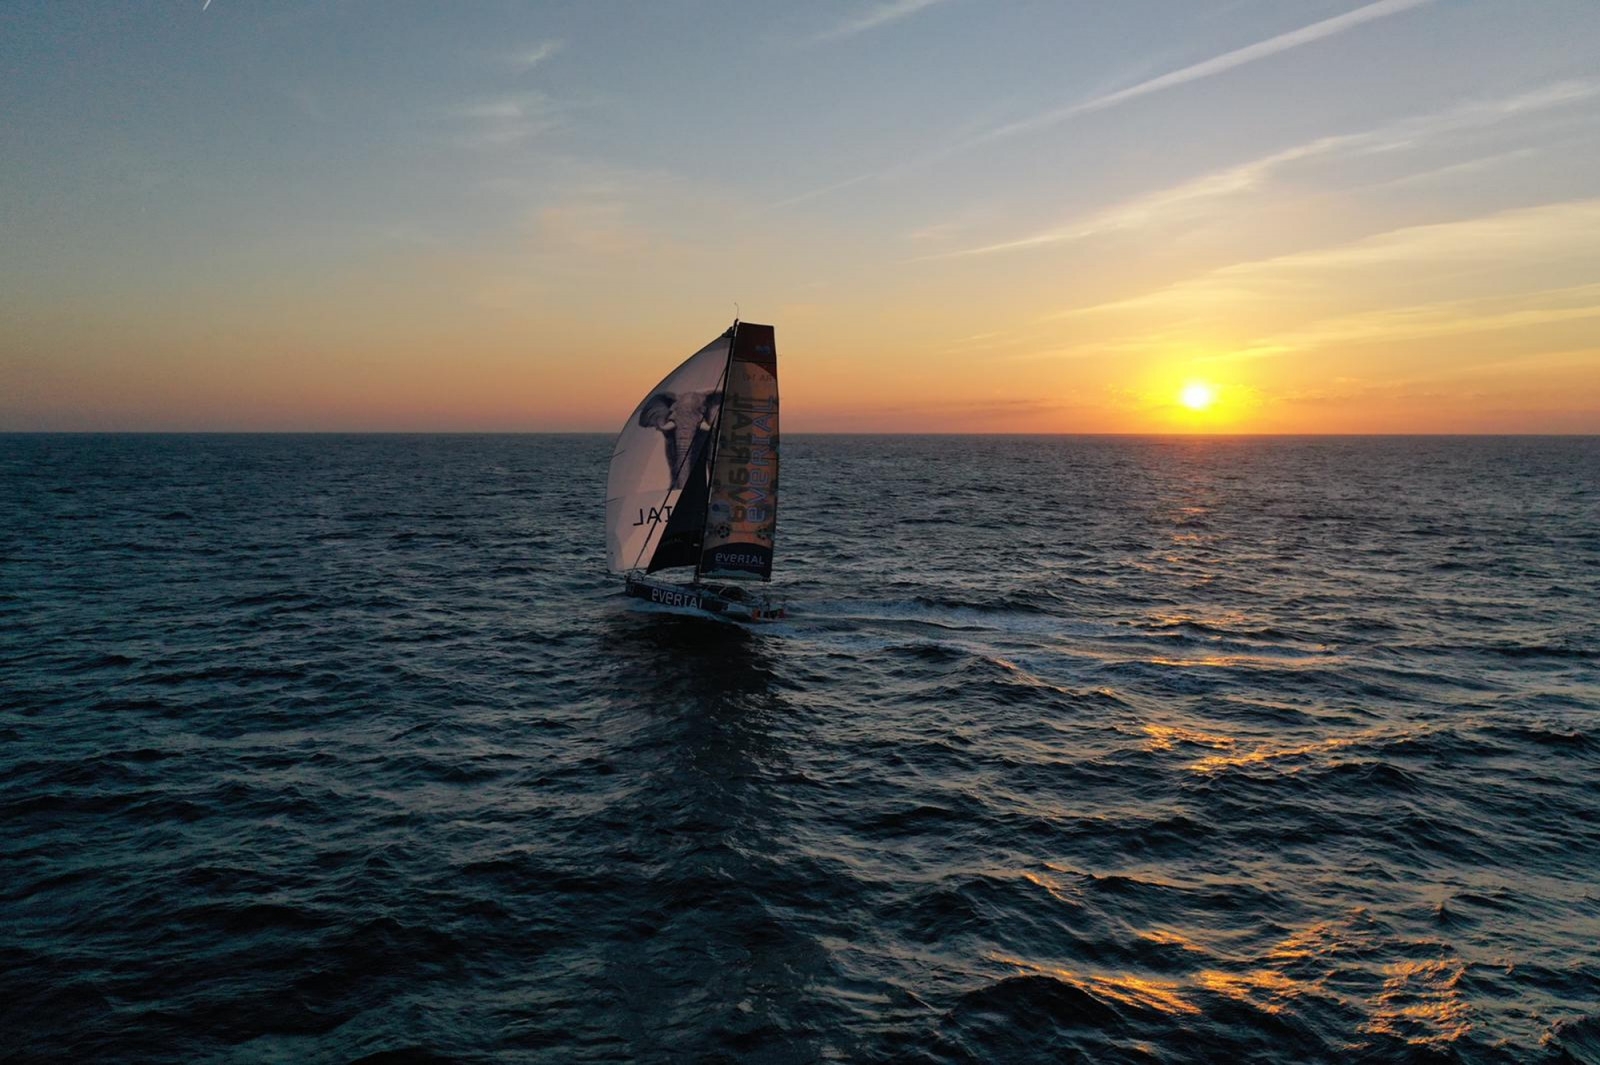  IMOCA Open 60, Class 40, Ultime, Ocean50  Transat Jacques Vabre  Day 14  the Swiss